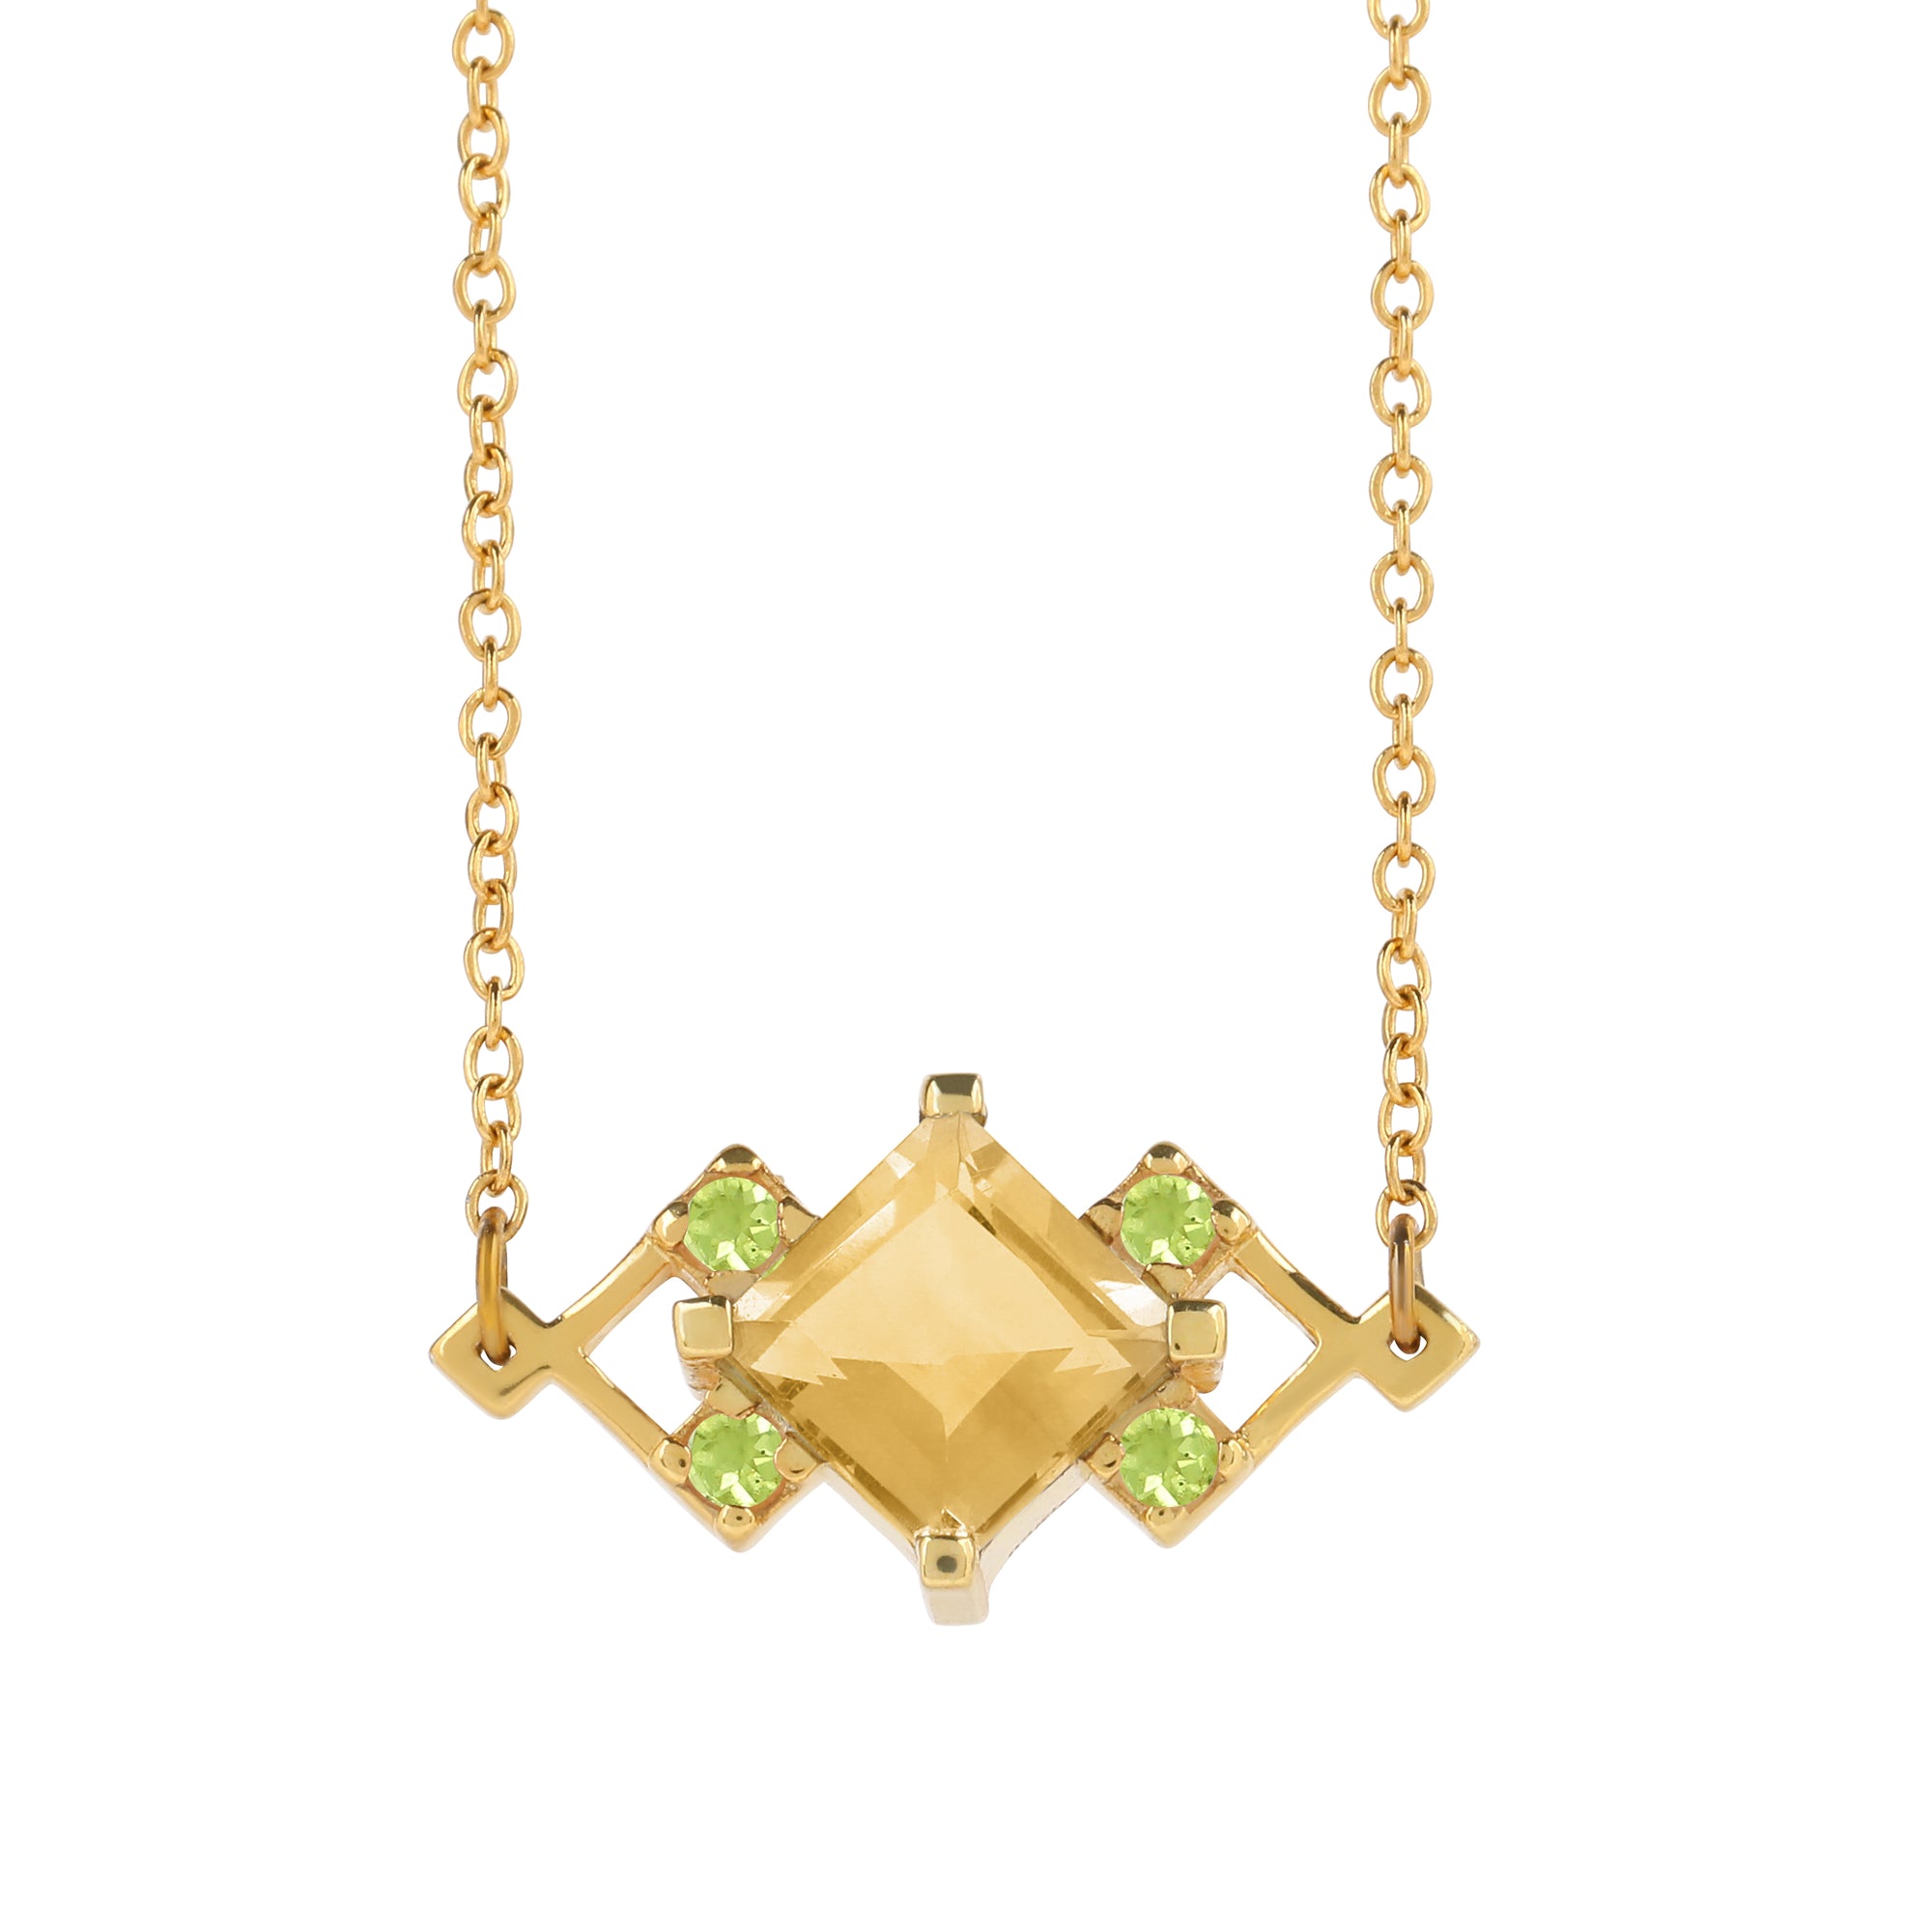 Reconceptions Petite Necklace - Gold - Yellow